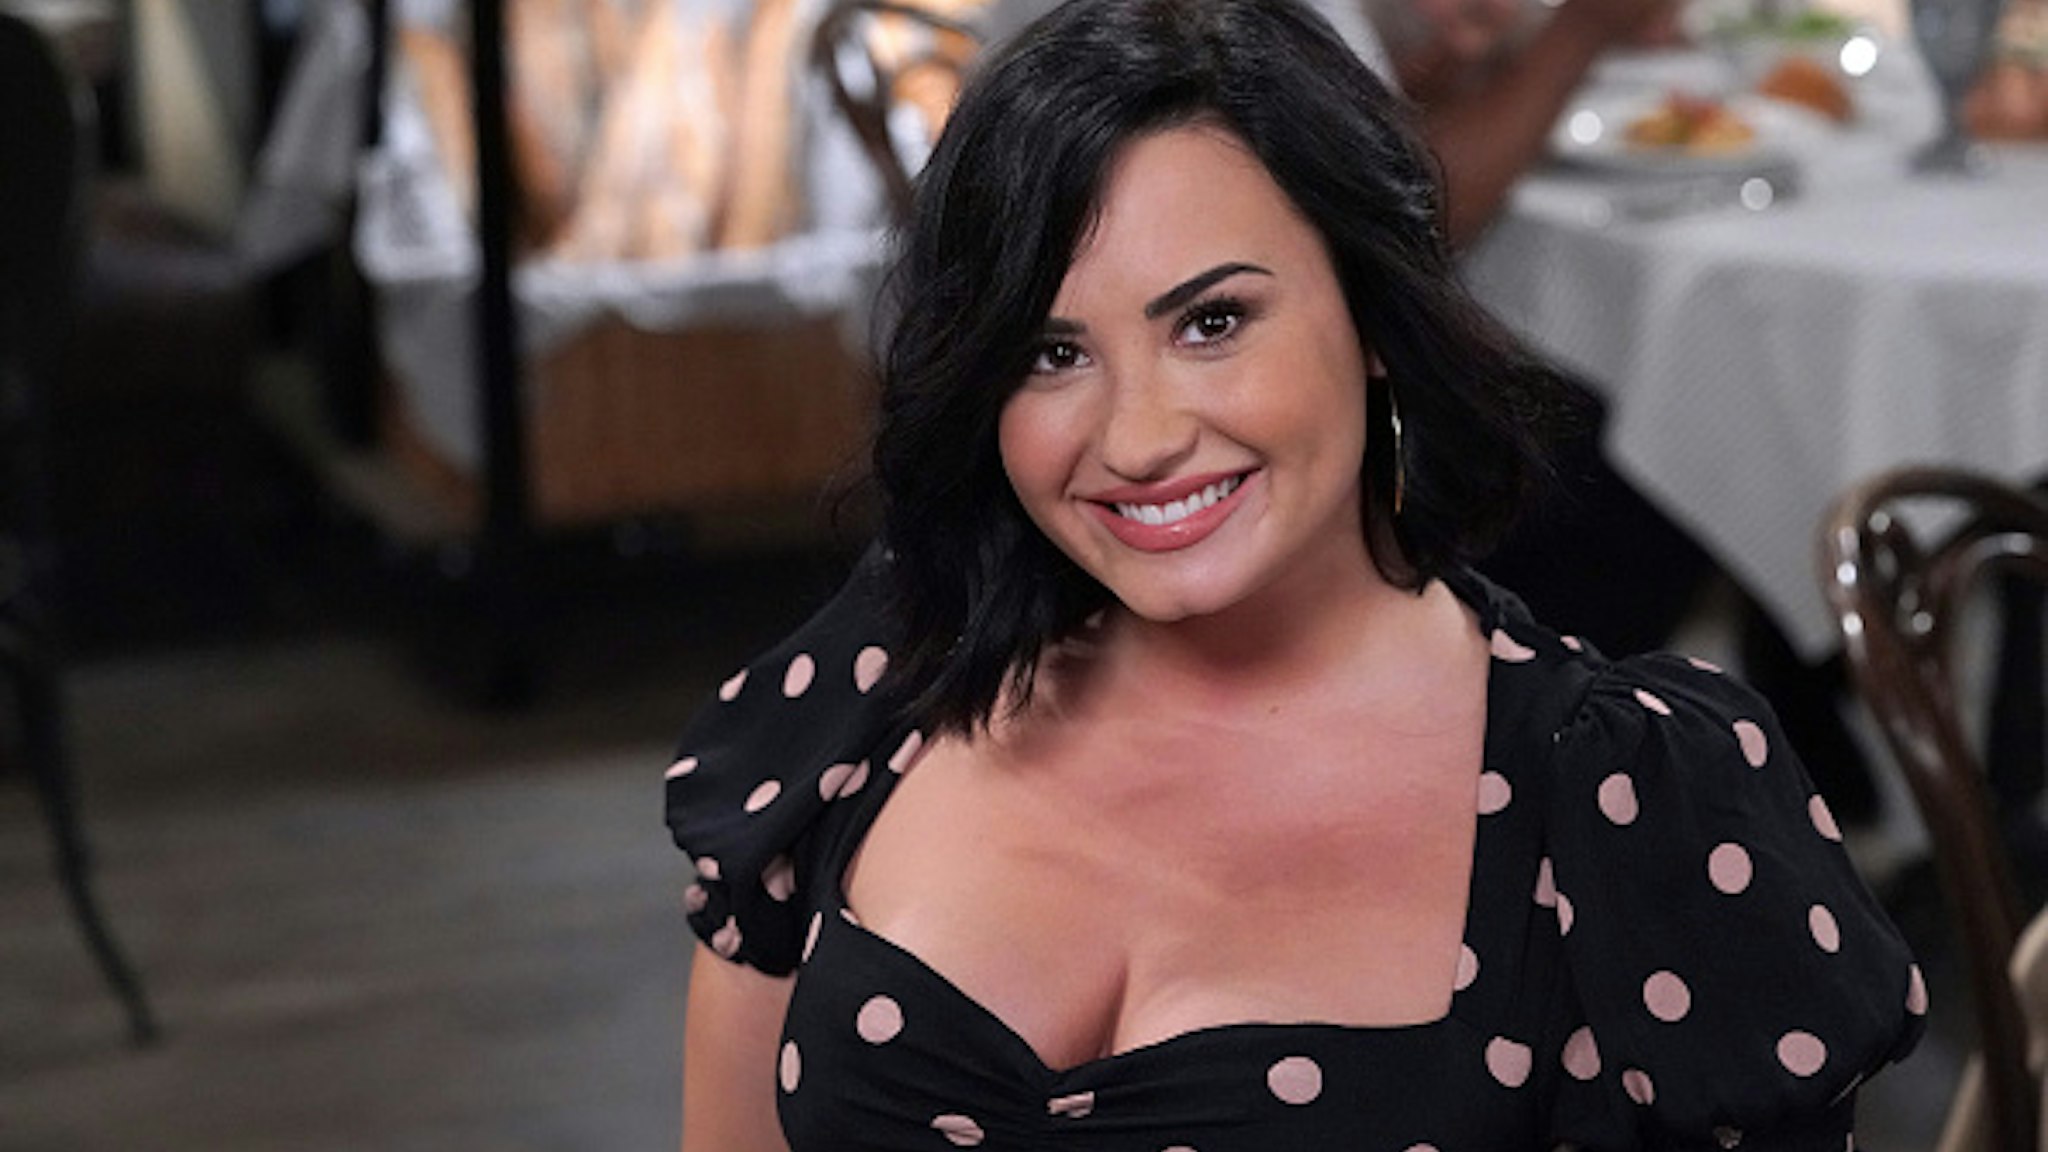 WILL &amp; GRACE -- "Broadway Boundries" Episode 315 -- Pictured: Demi Lovato as Jenny